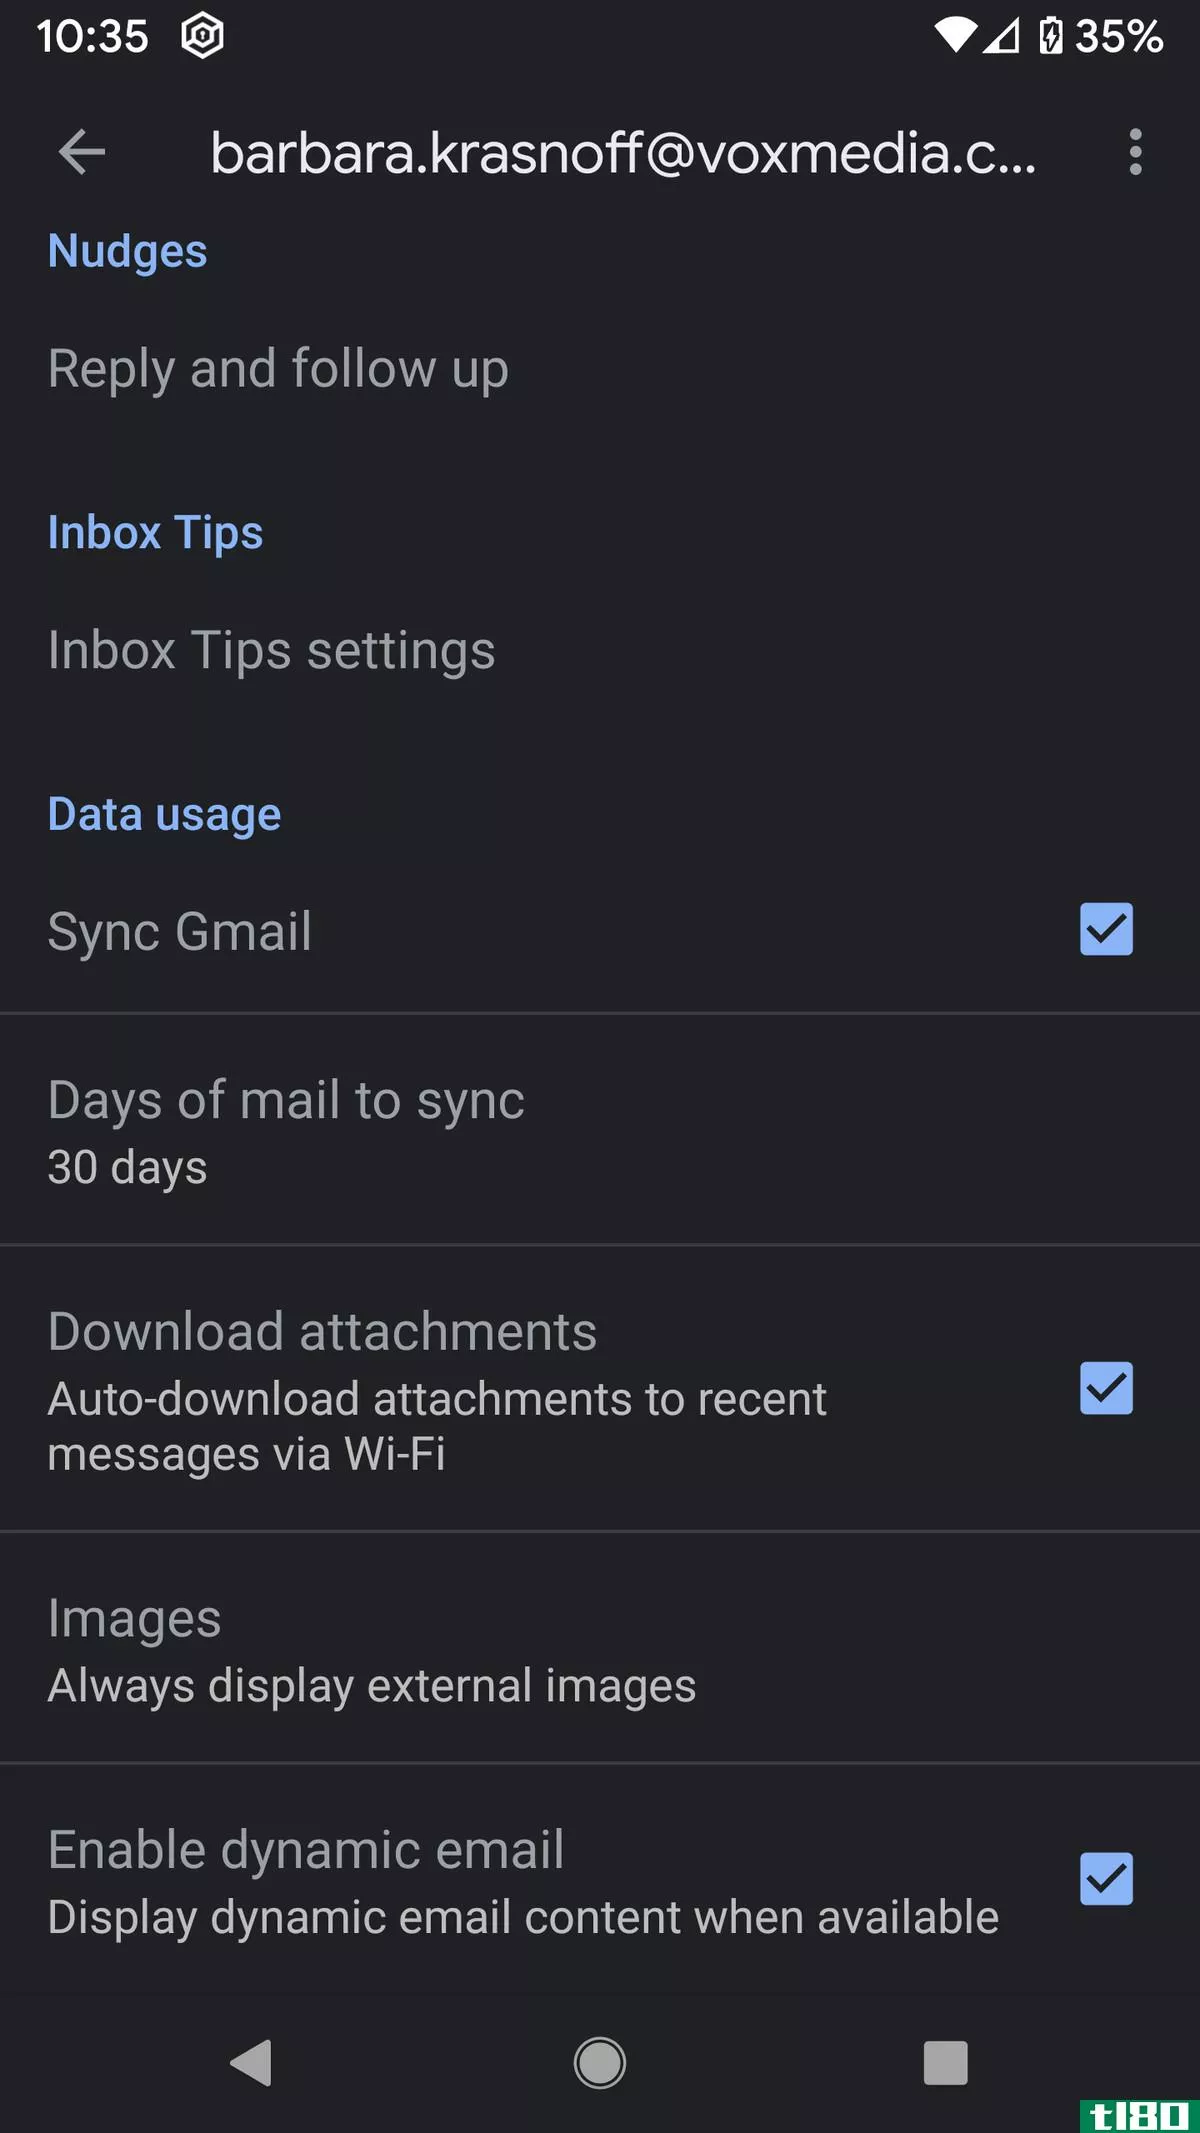 In Settings for your Gmail account, scroll down to “Images.”